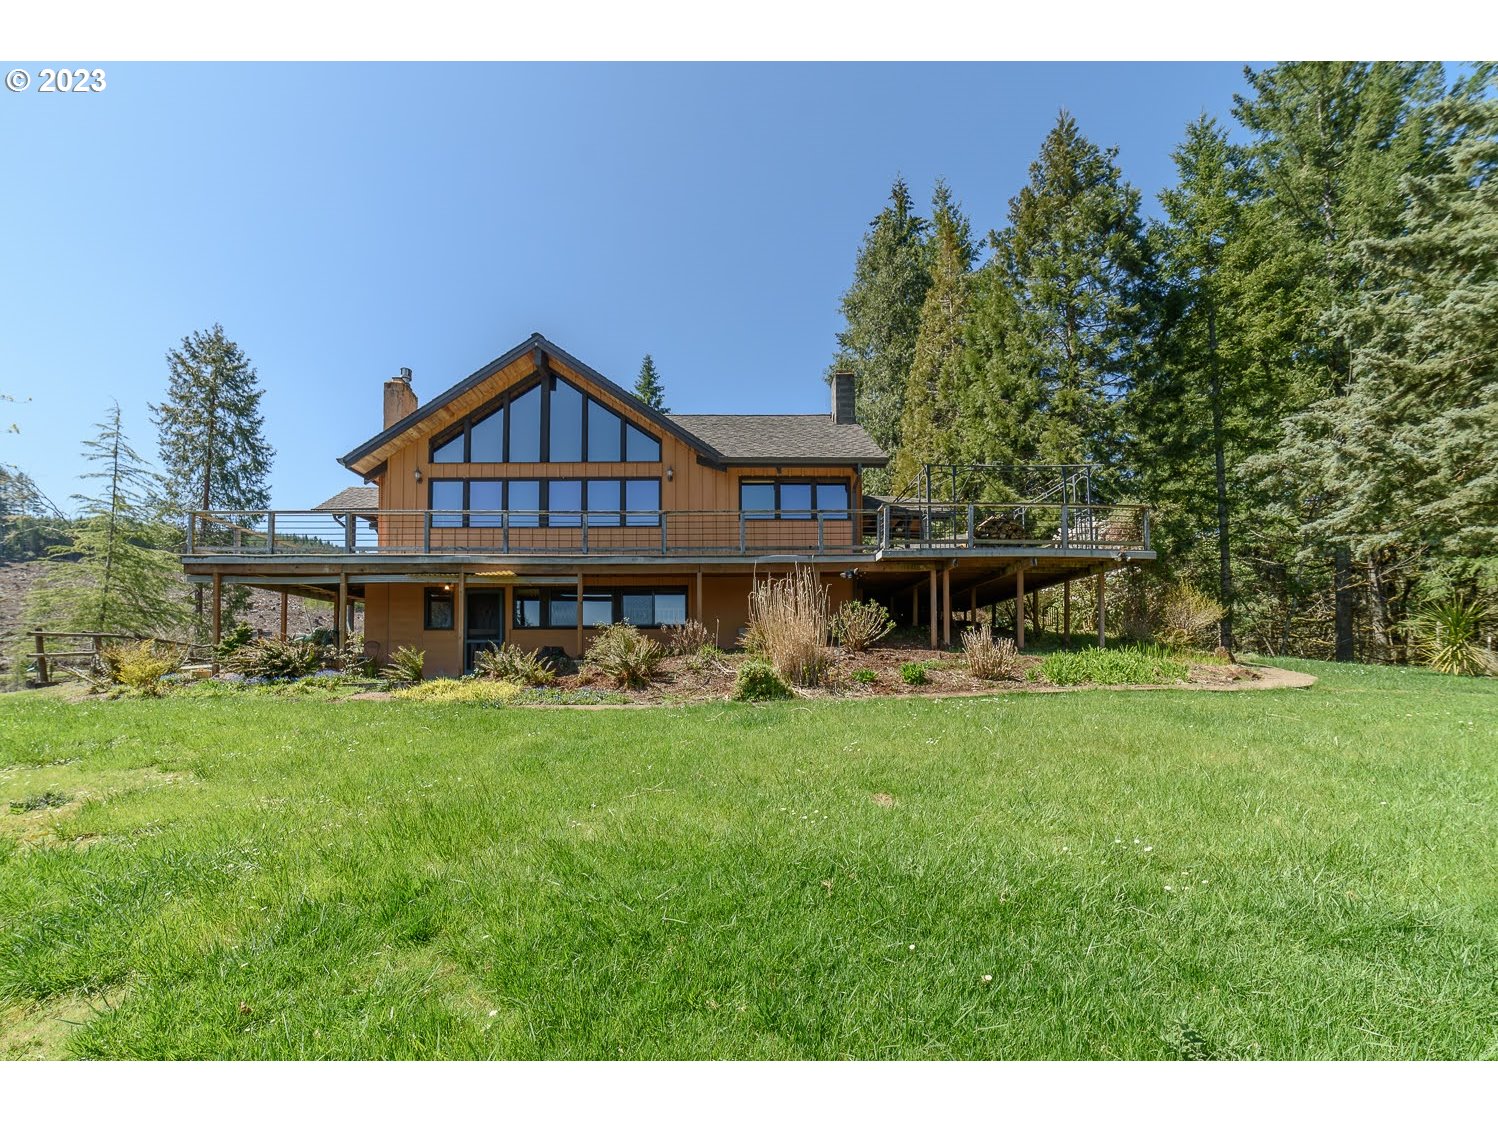 30697 KENADY LN, Cottage Grove, OR 97424